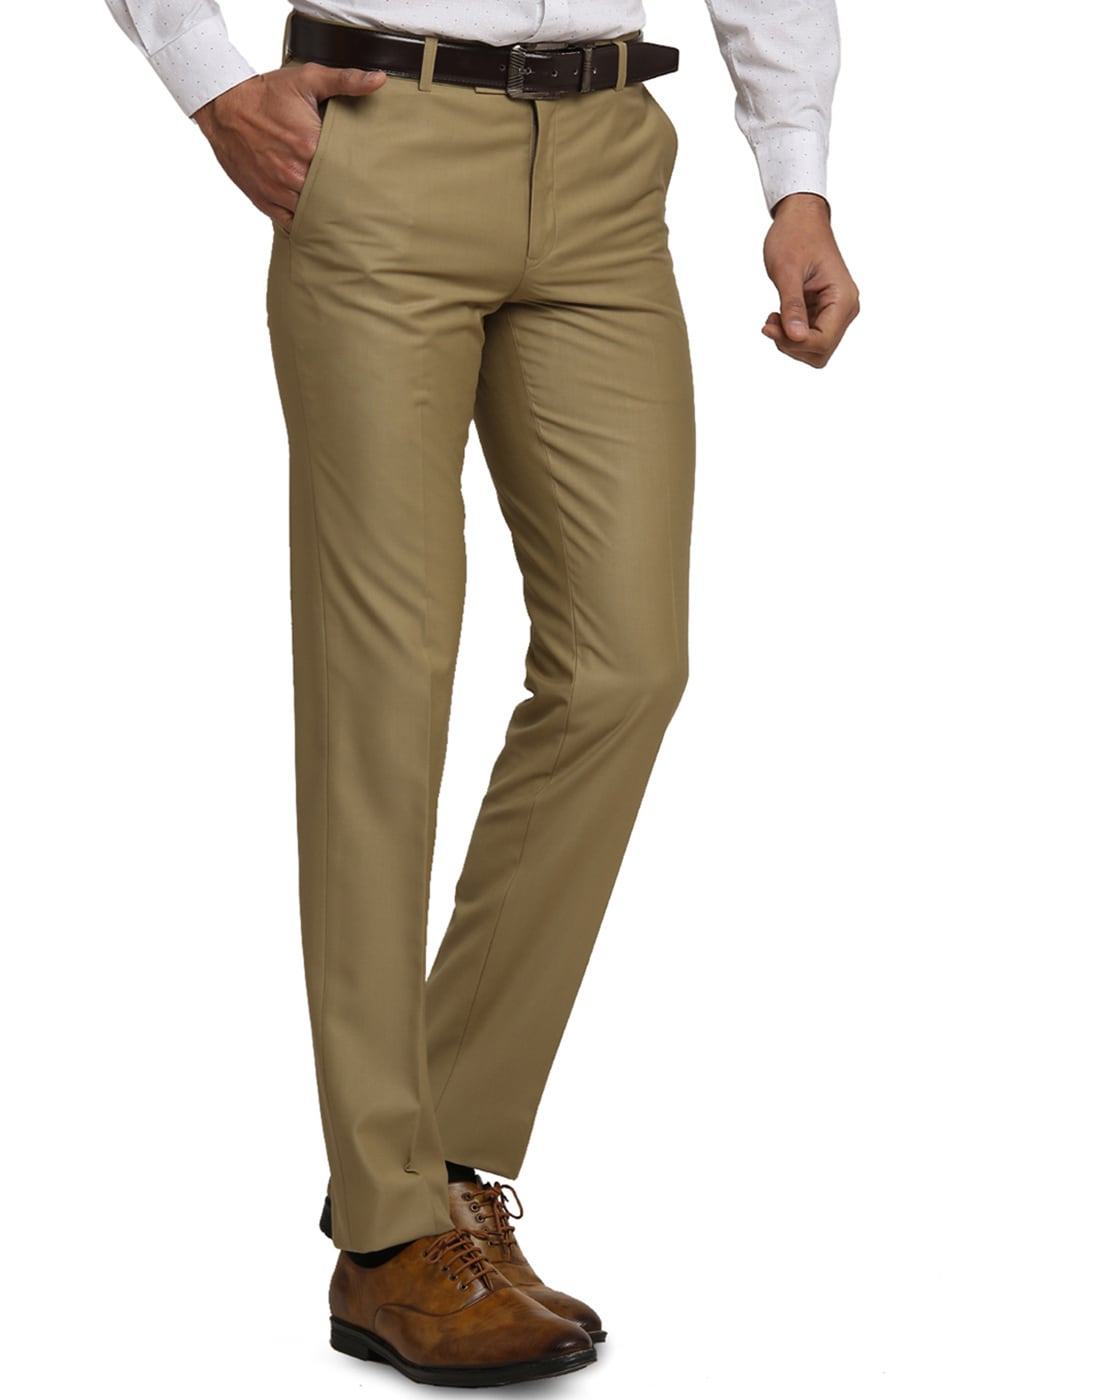 What colors should you wear with khaki pants? - Quora